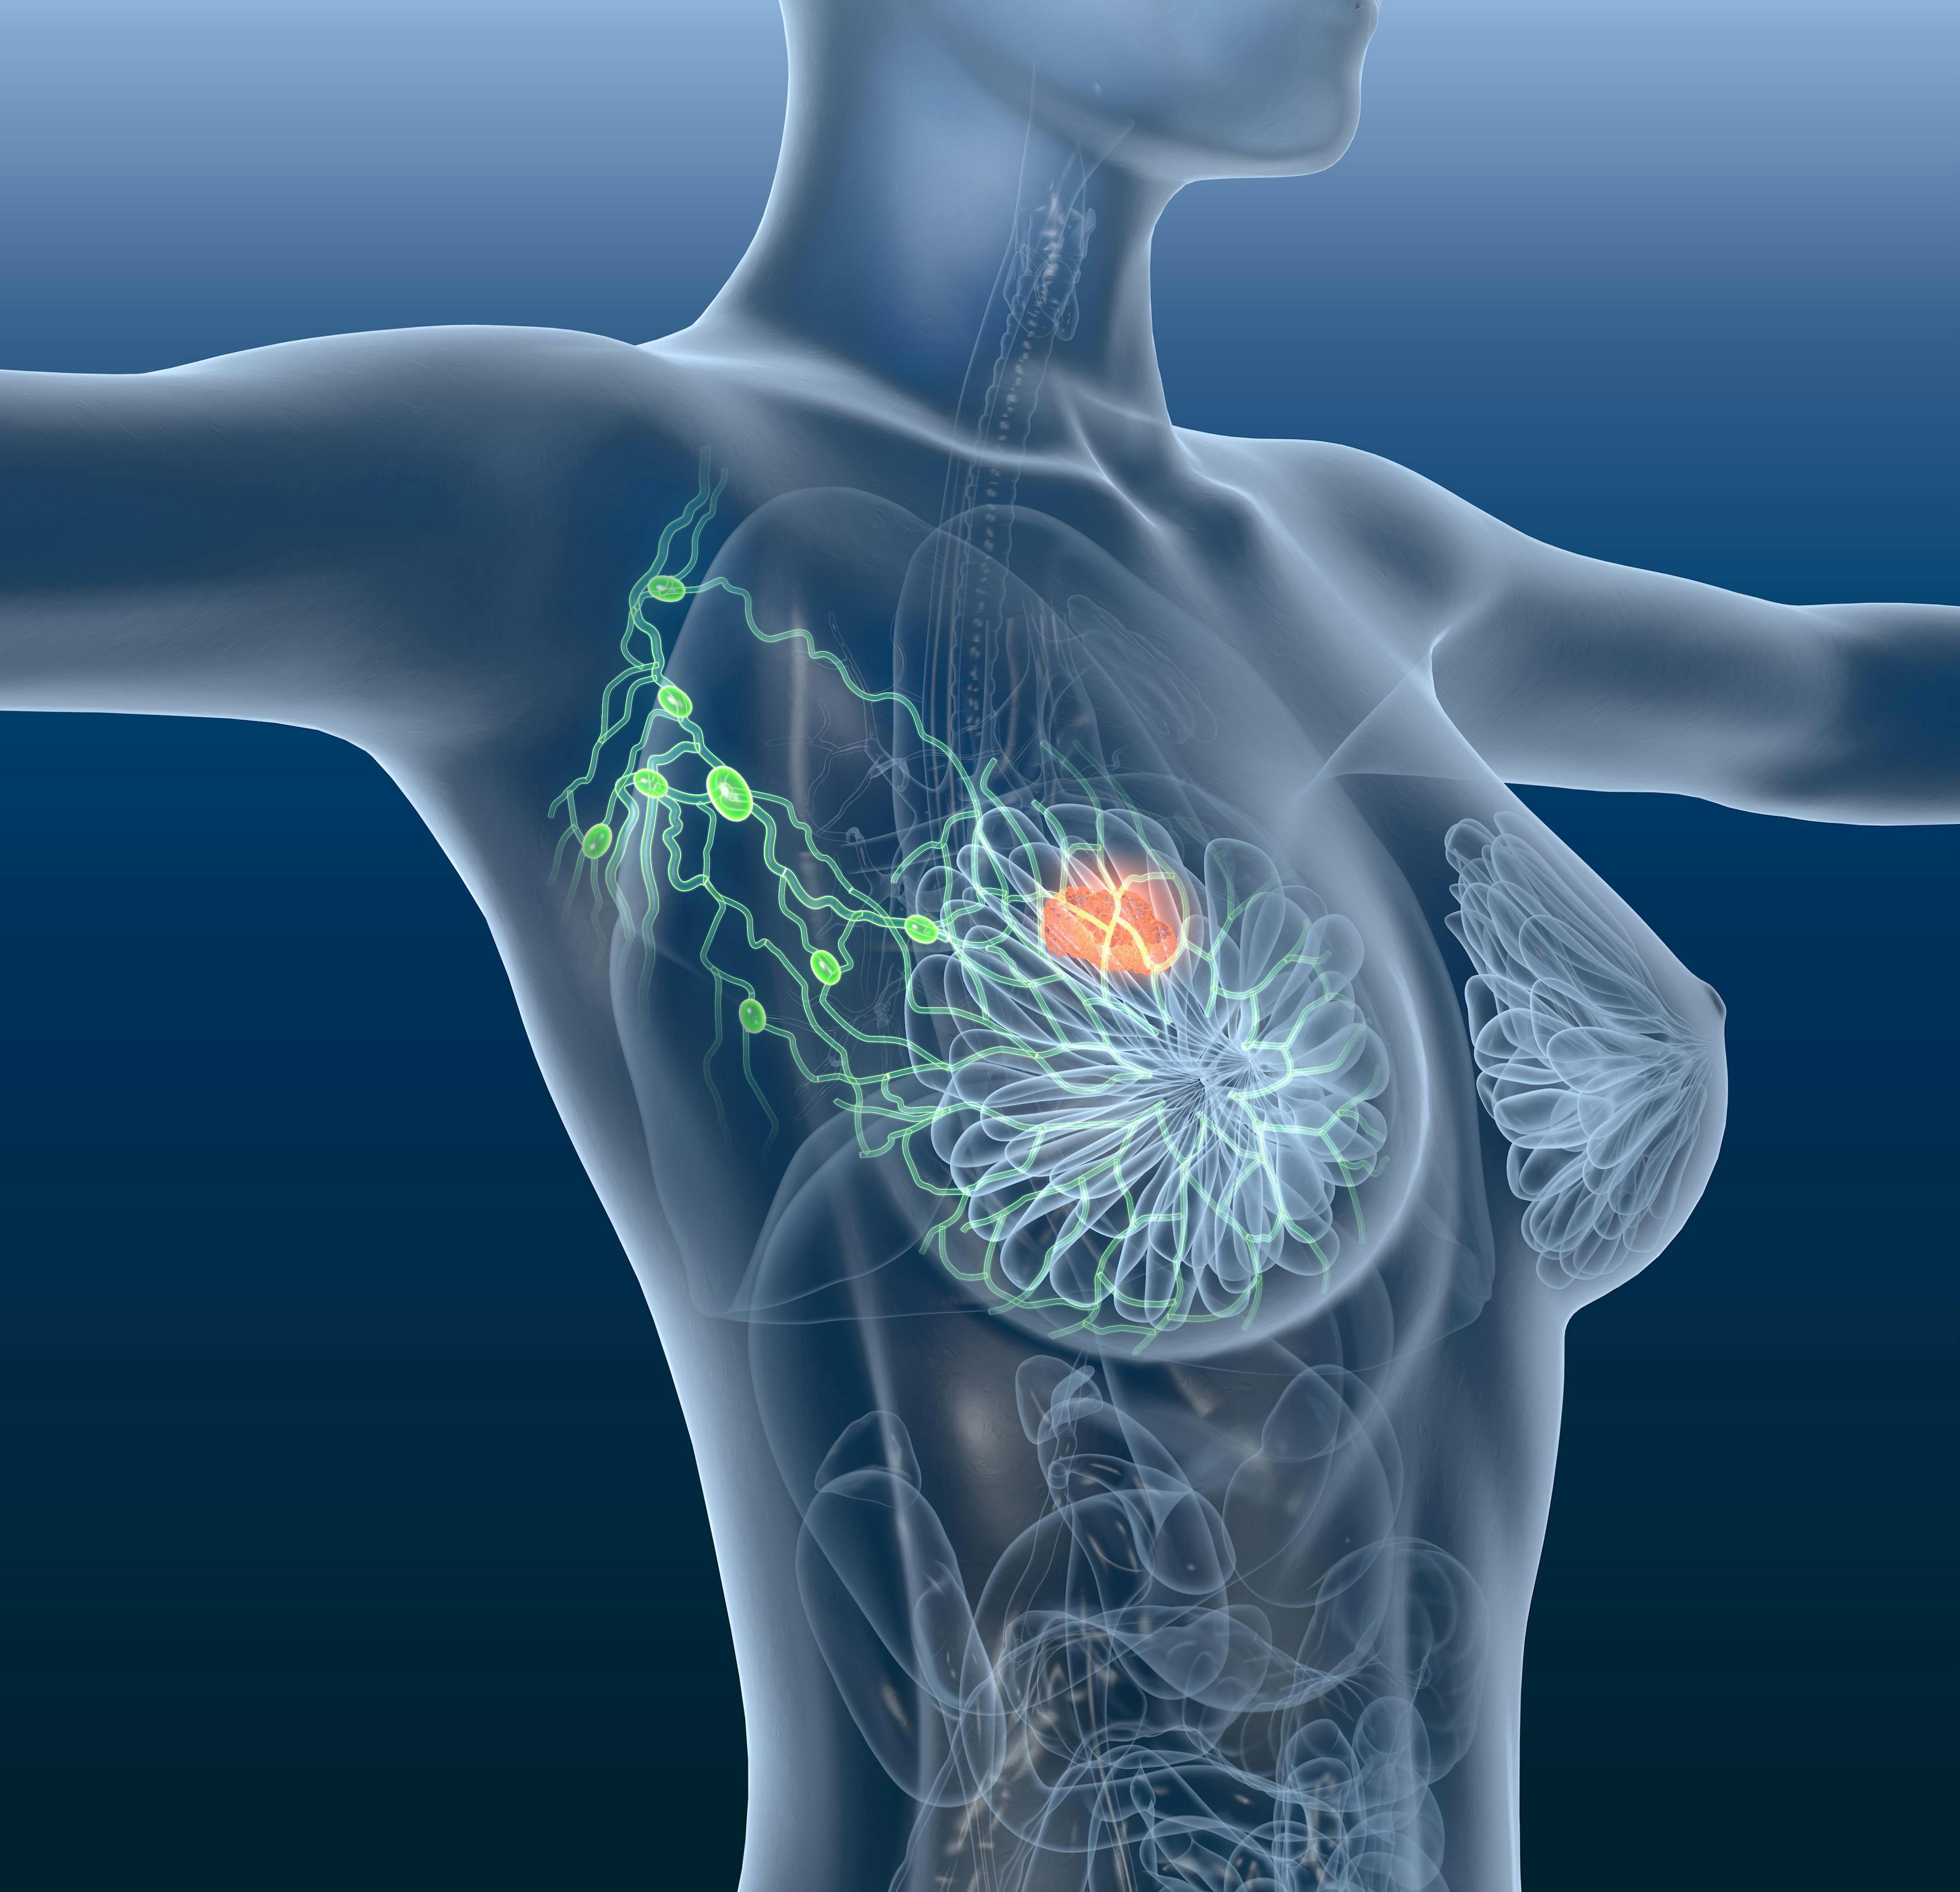 Adjuvant Therapy Selection by Recurrence Score After IORT May Lower Recurrence Rates for ER+ Early Breast Cancer 